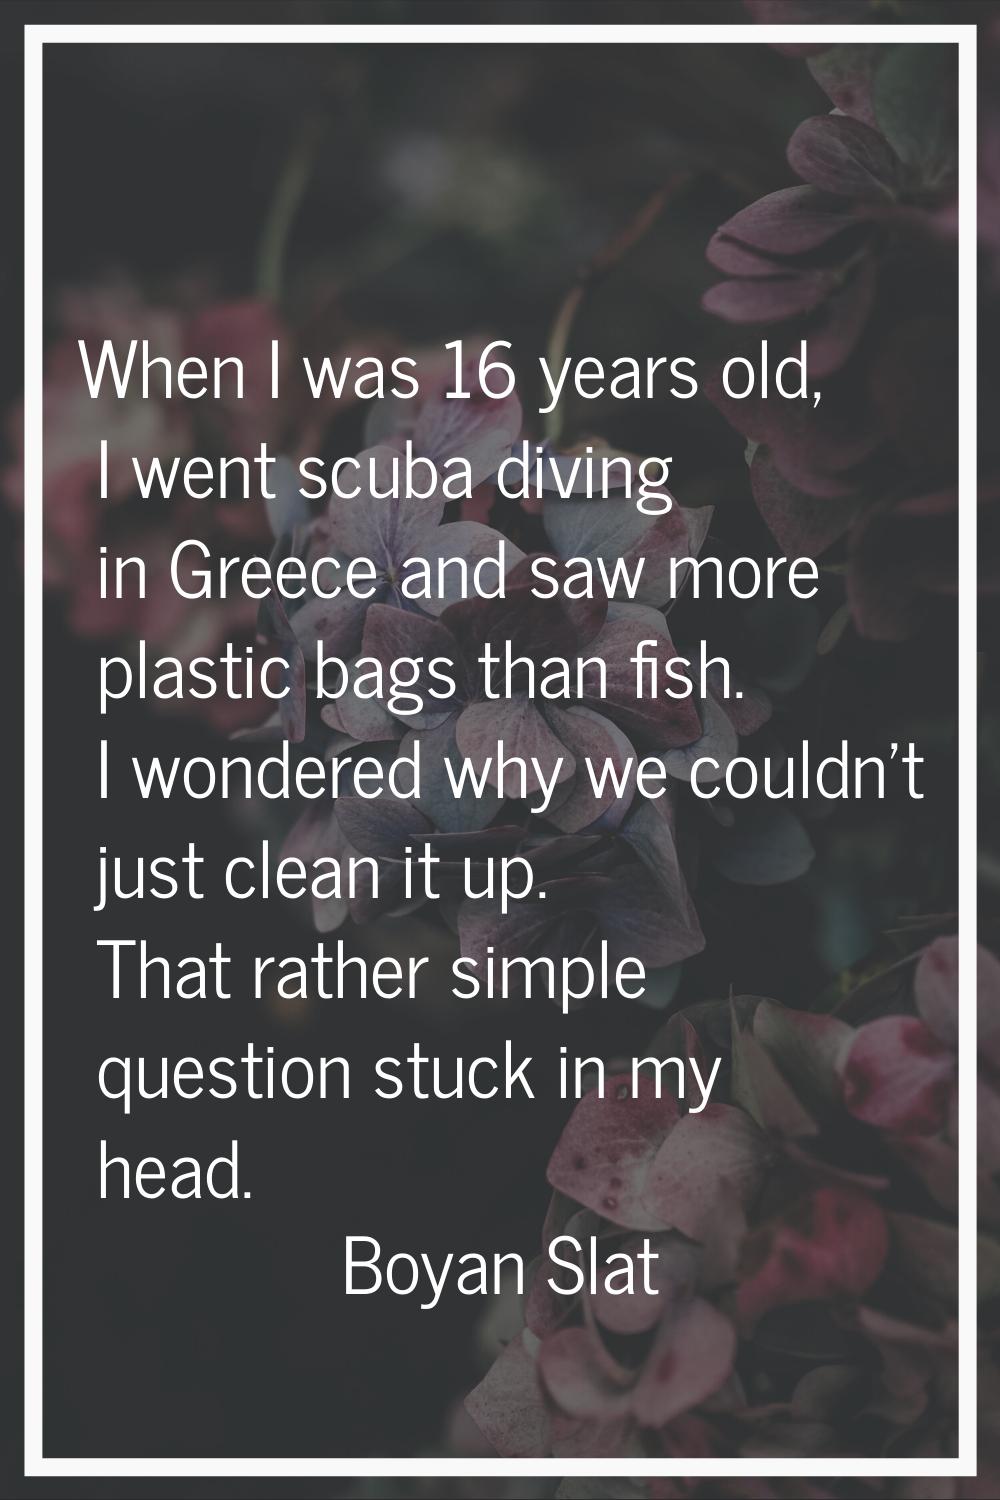 When I was 16 years old, I went scuba diving in Greece and saw more plastic bags than fish. I wonde